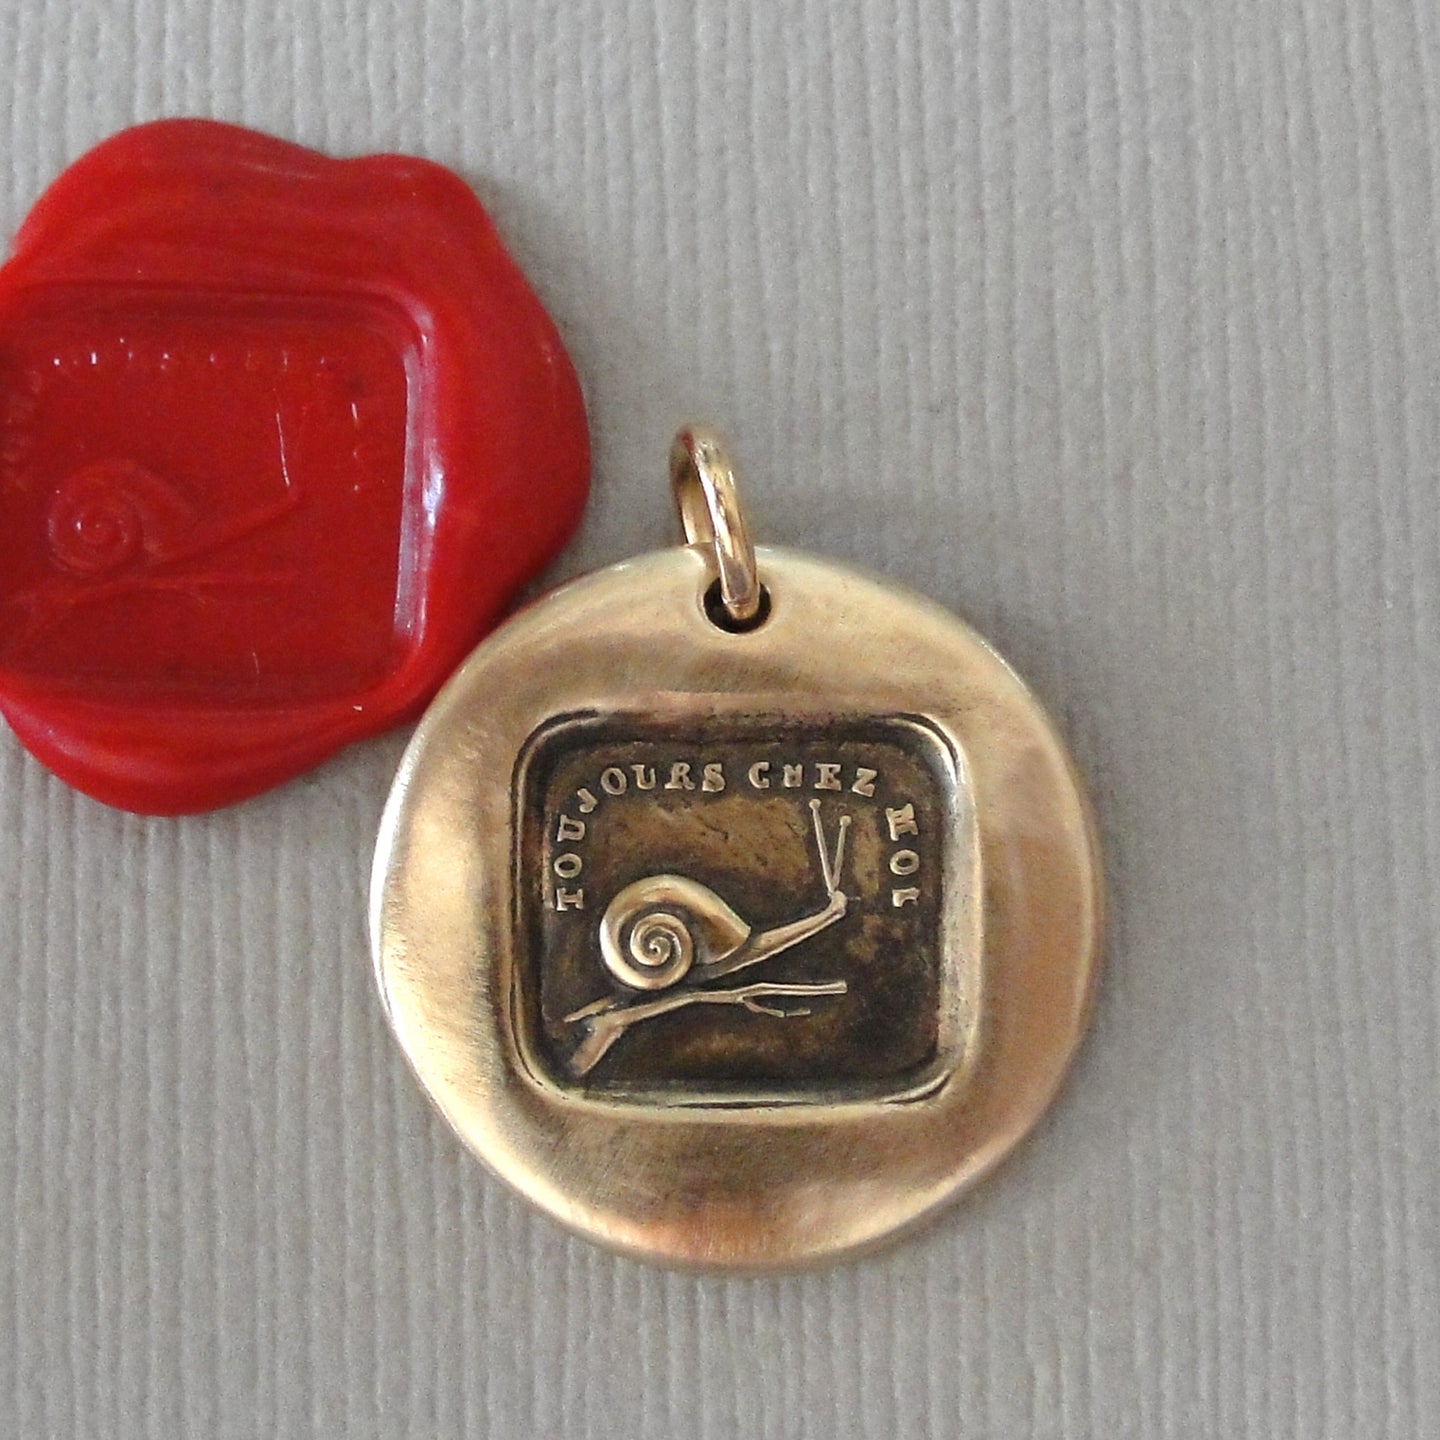 Snail Wax Seal Charm - Always at Home - Antique Bronze Wax Seal Jewelry Pendant